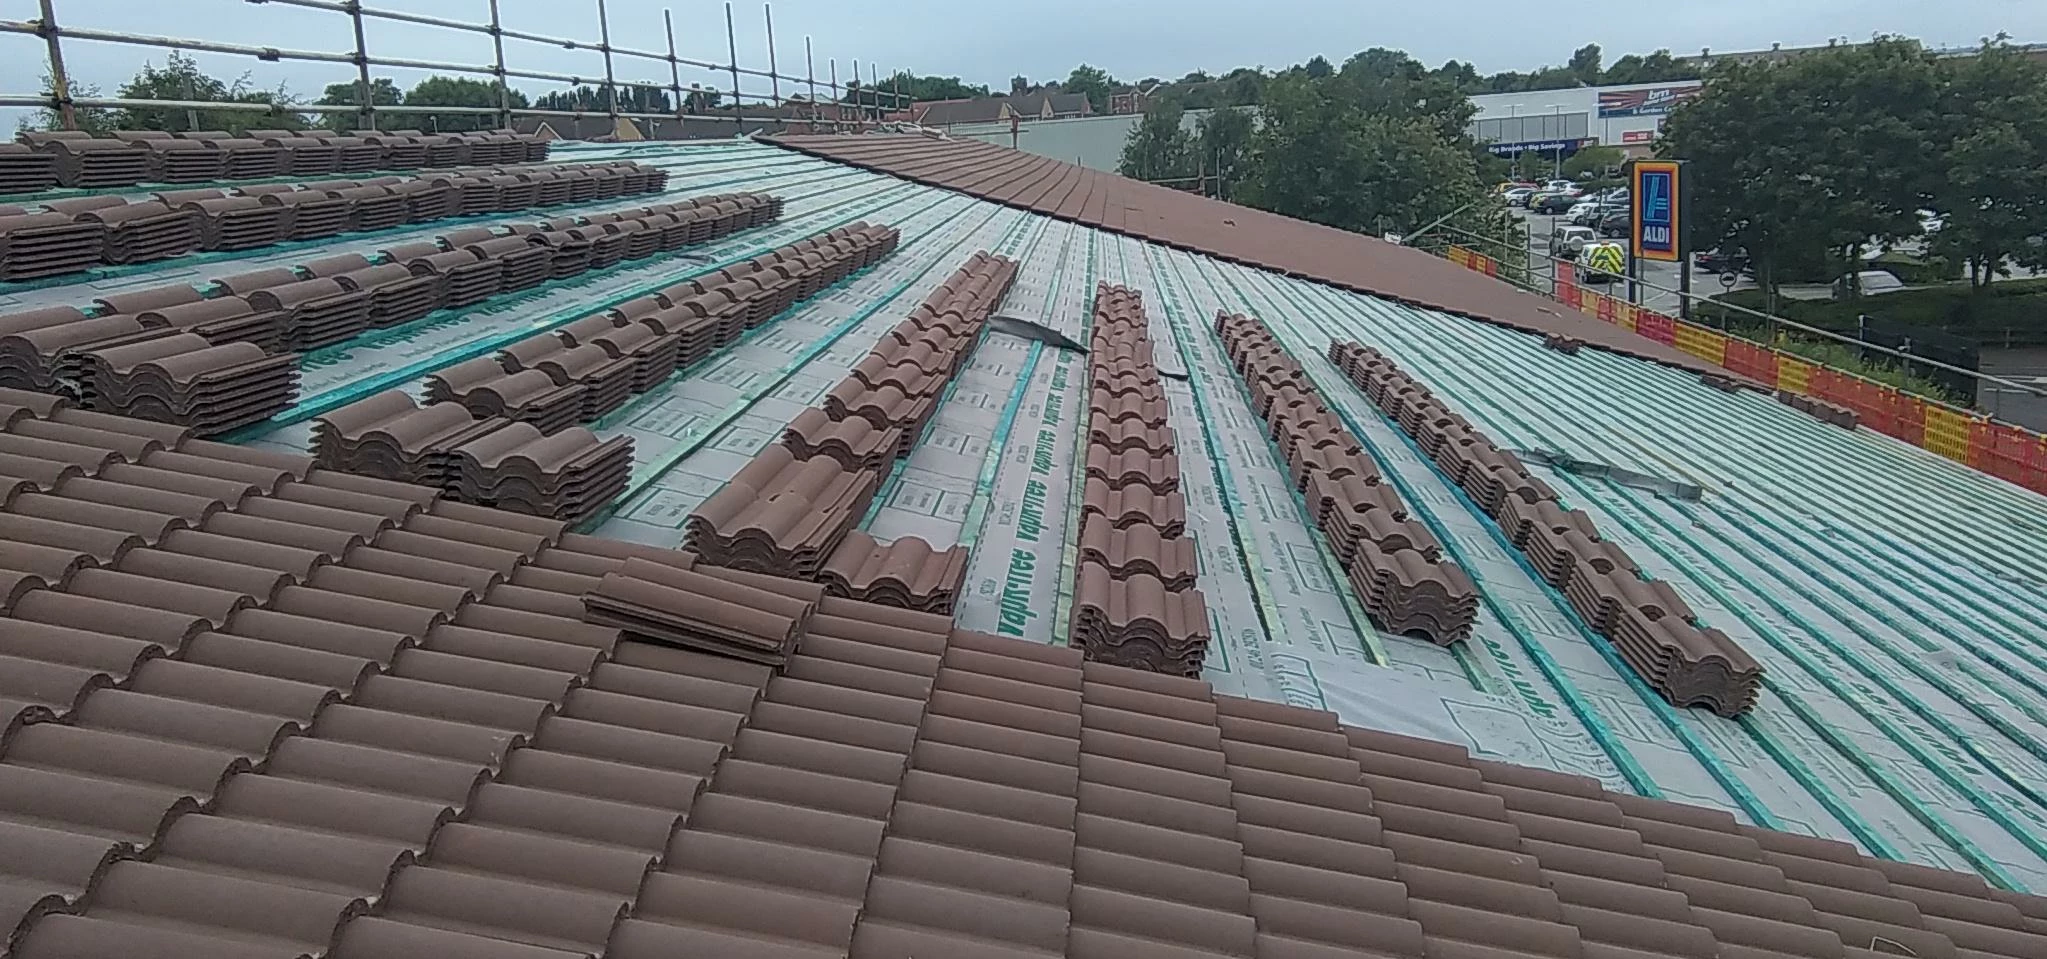 The replacement tiled roof installed at Aldi in Castleford by Martin-Brooks. 